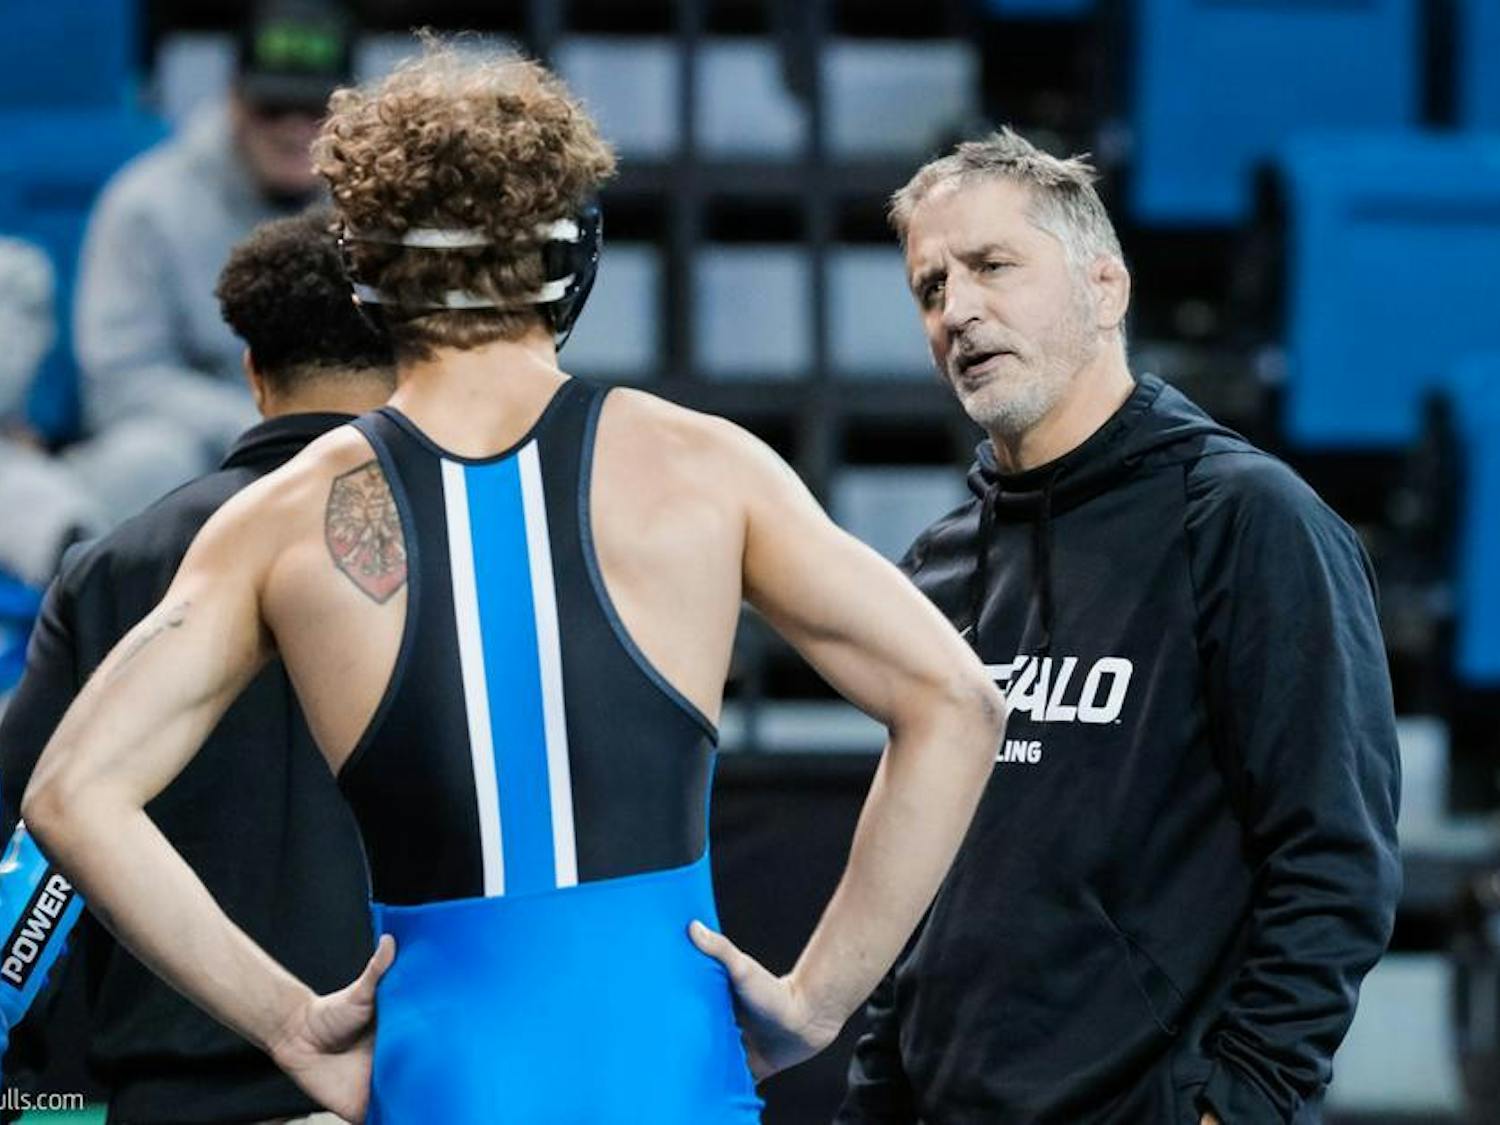 UB wrestling went 10-12 overall in the 2023-24 season under Stutzman's leadership, with a 5-3 record in conference play. &nbsp;